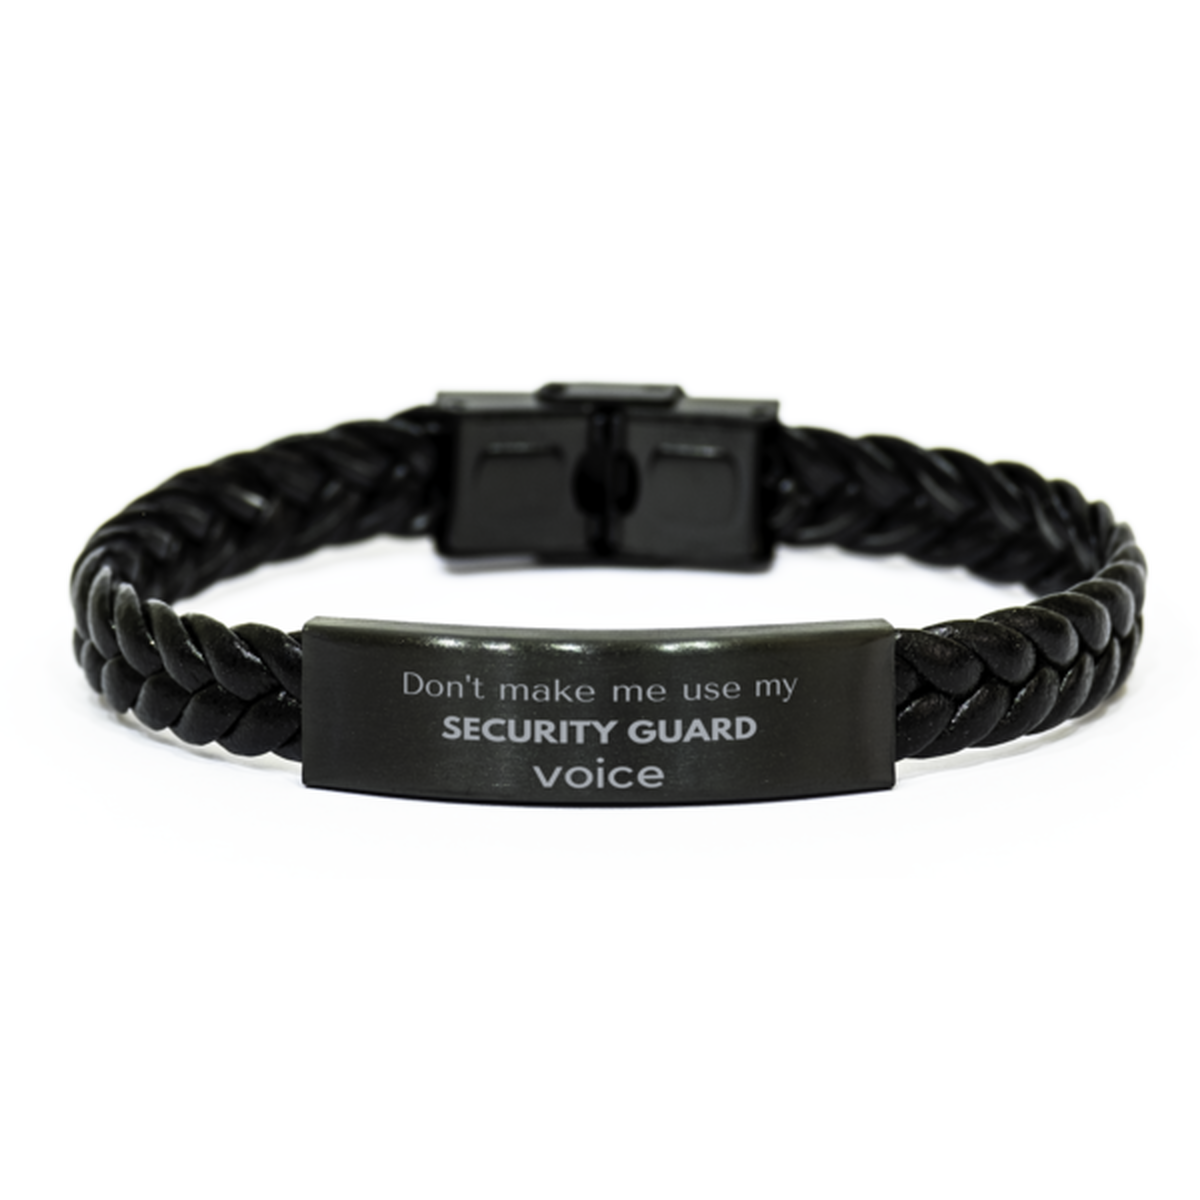 Don't make me use my Security Guard voice, Sarcasm Security Guard Gifts, Christmas Security Guard Braided Leather Bracelet Birthday Unique Gifts For Security Guard Coworkers, Men, Women, Colleague, Friends